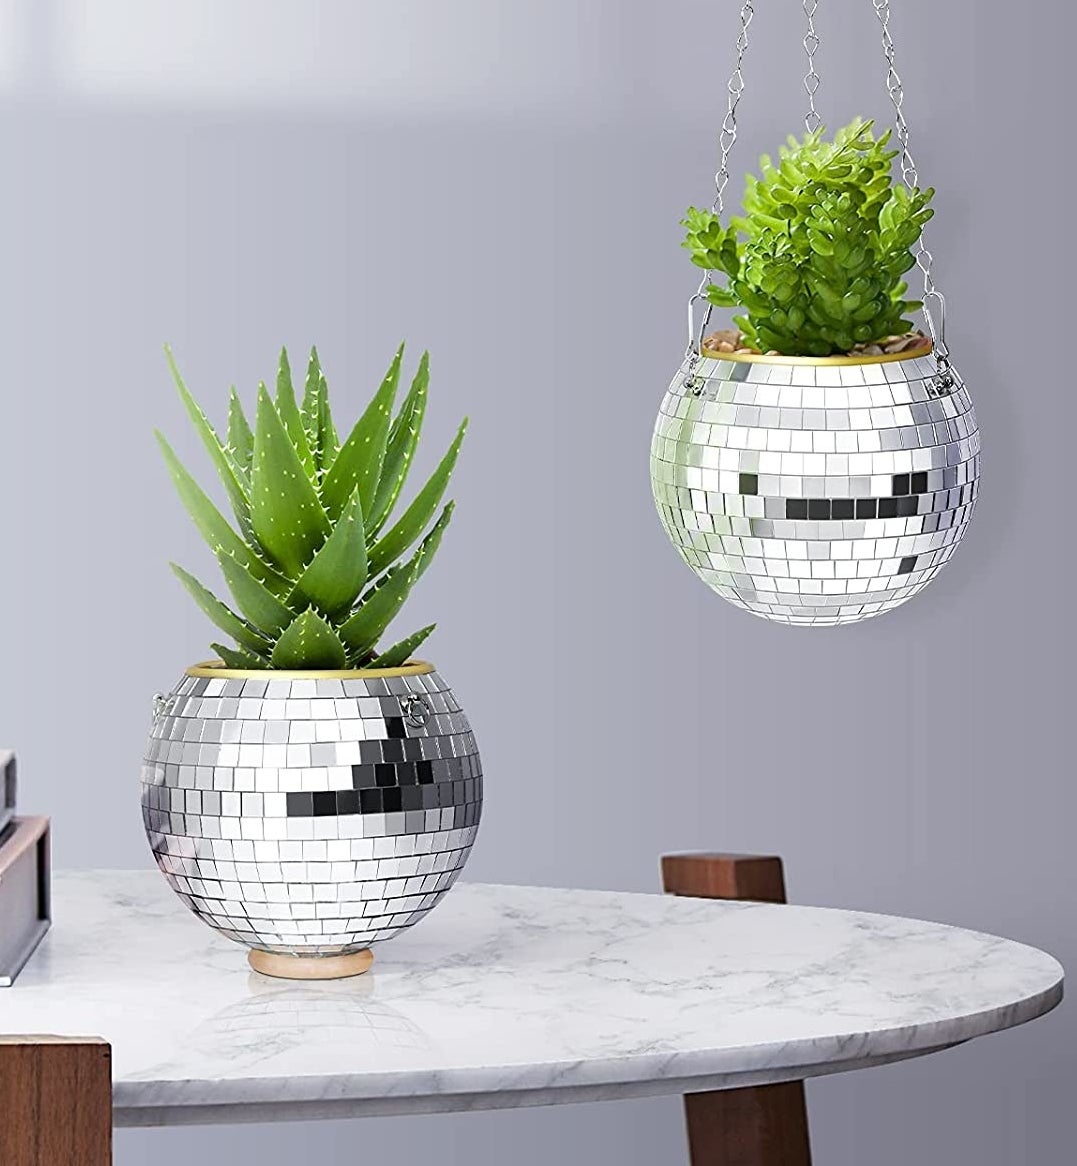 The disco ball planter sitting on a table and also hanging